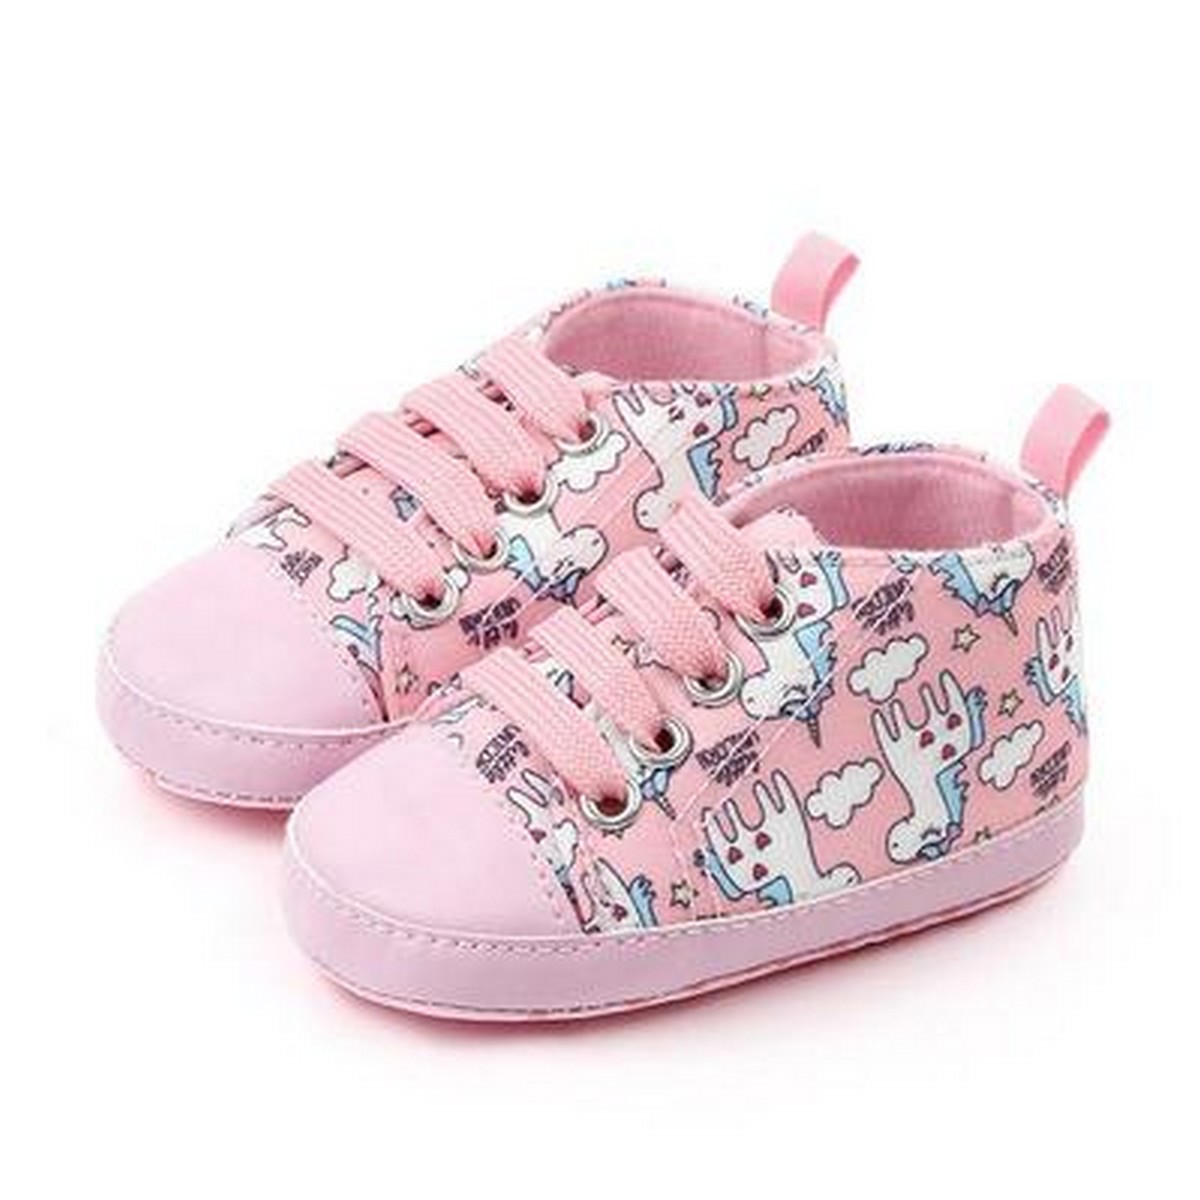 95 Trend Baby shoes lahore 